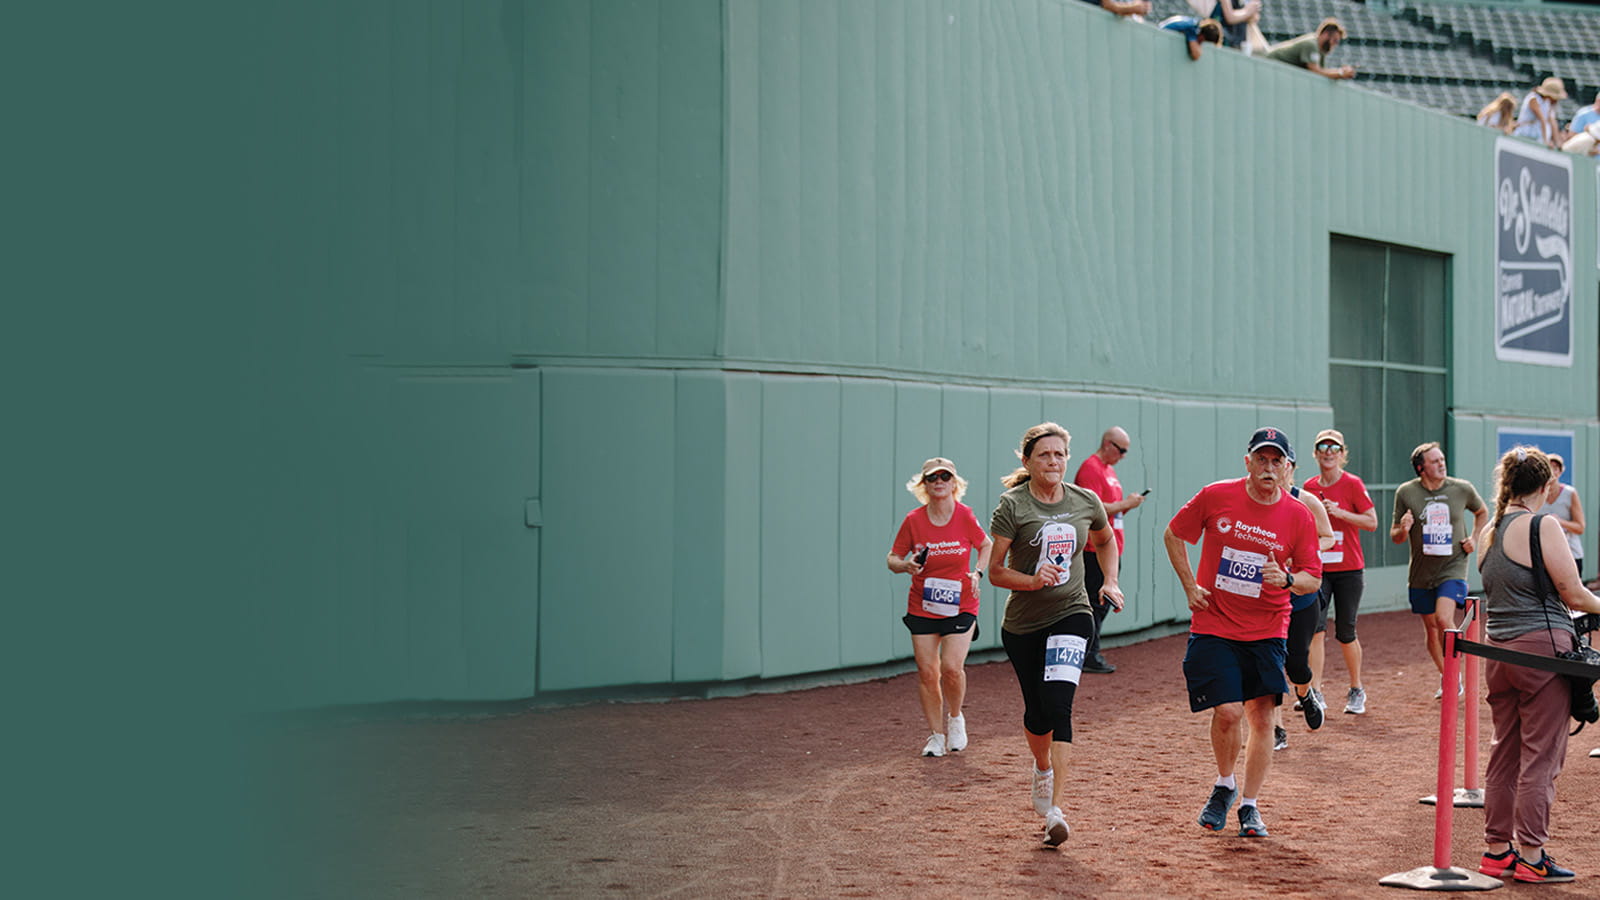 Several runners make a turn on the field at Fenway Park near the finish line of the Run to Home Base 9K event.